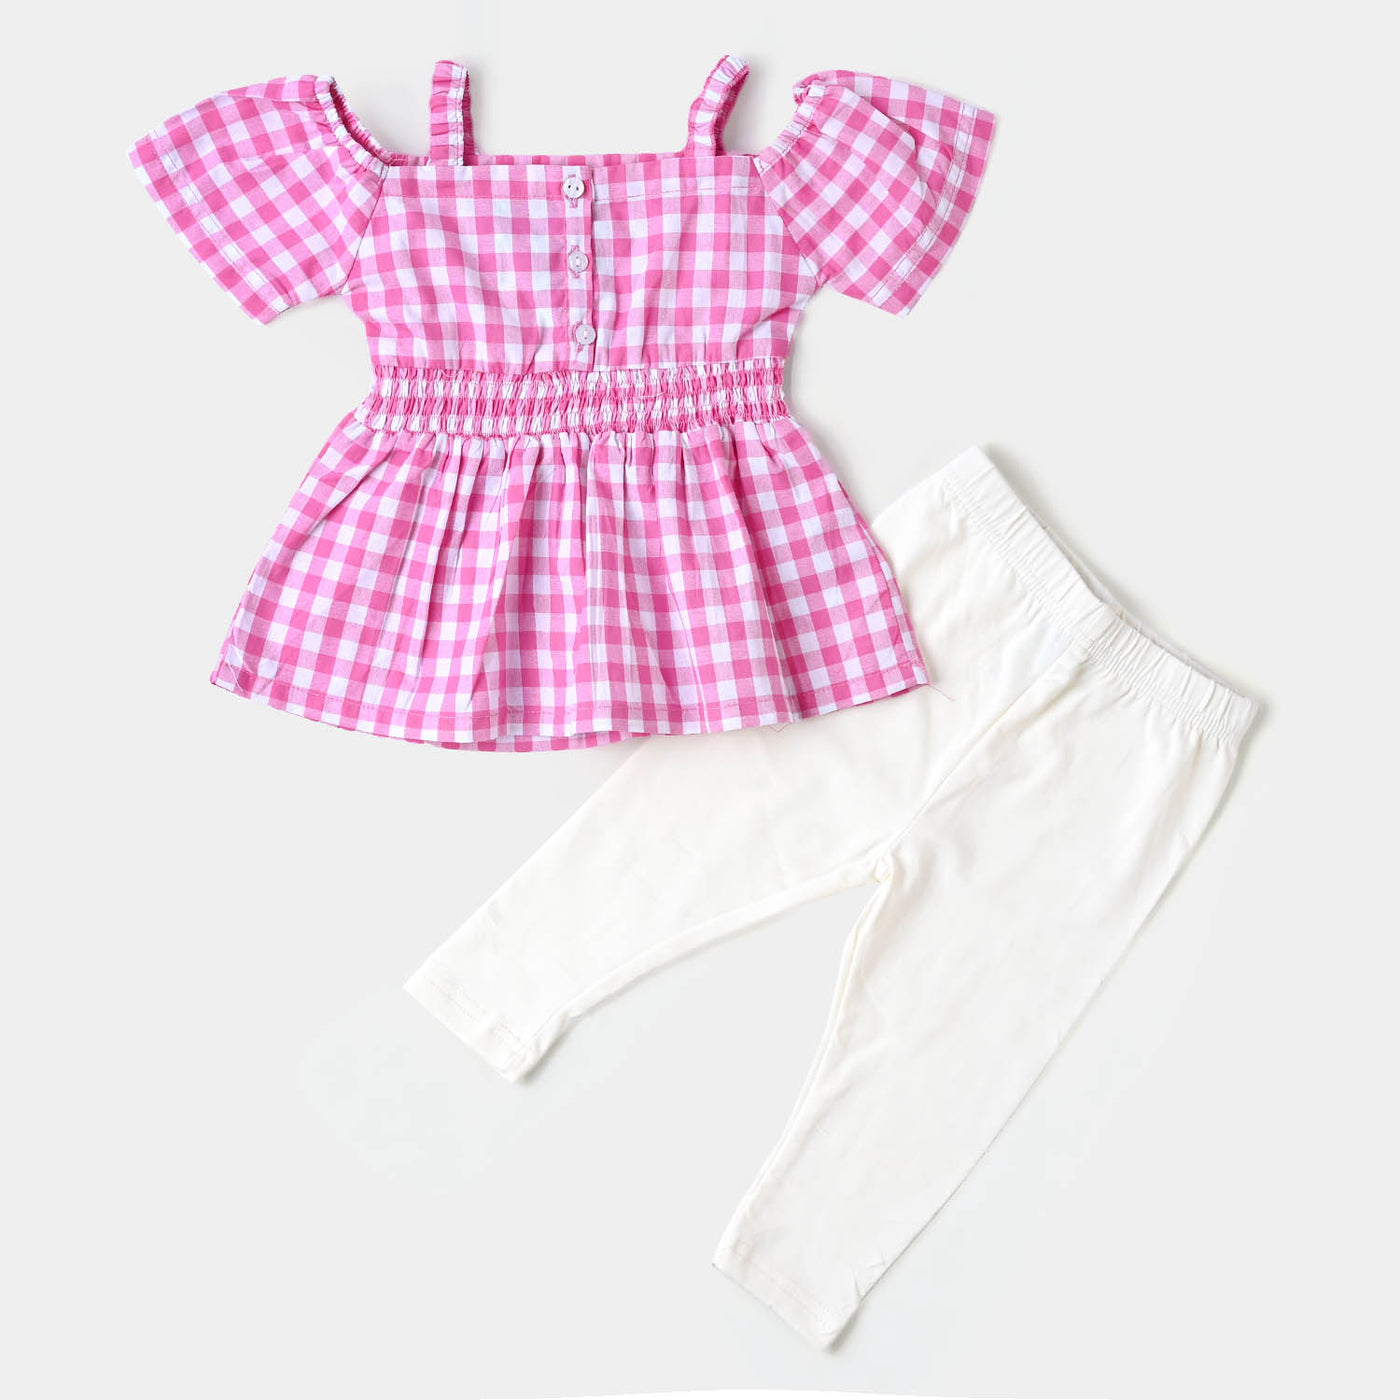 Infant Girls Woven 2PC Suit Checks - Pink